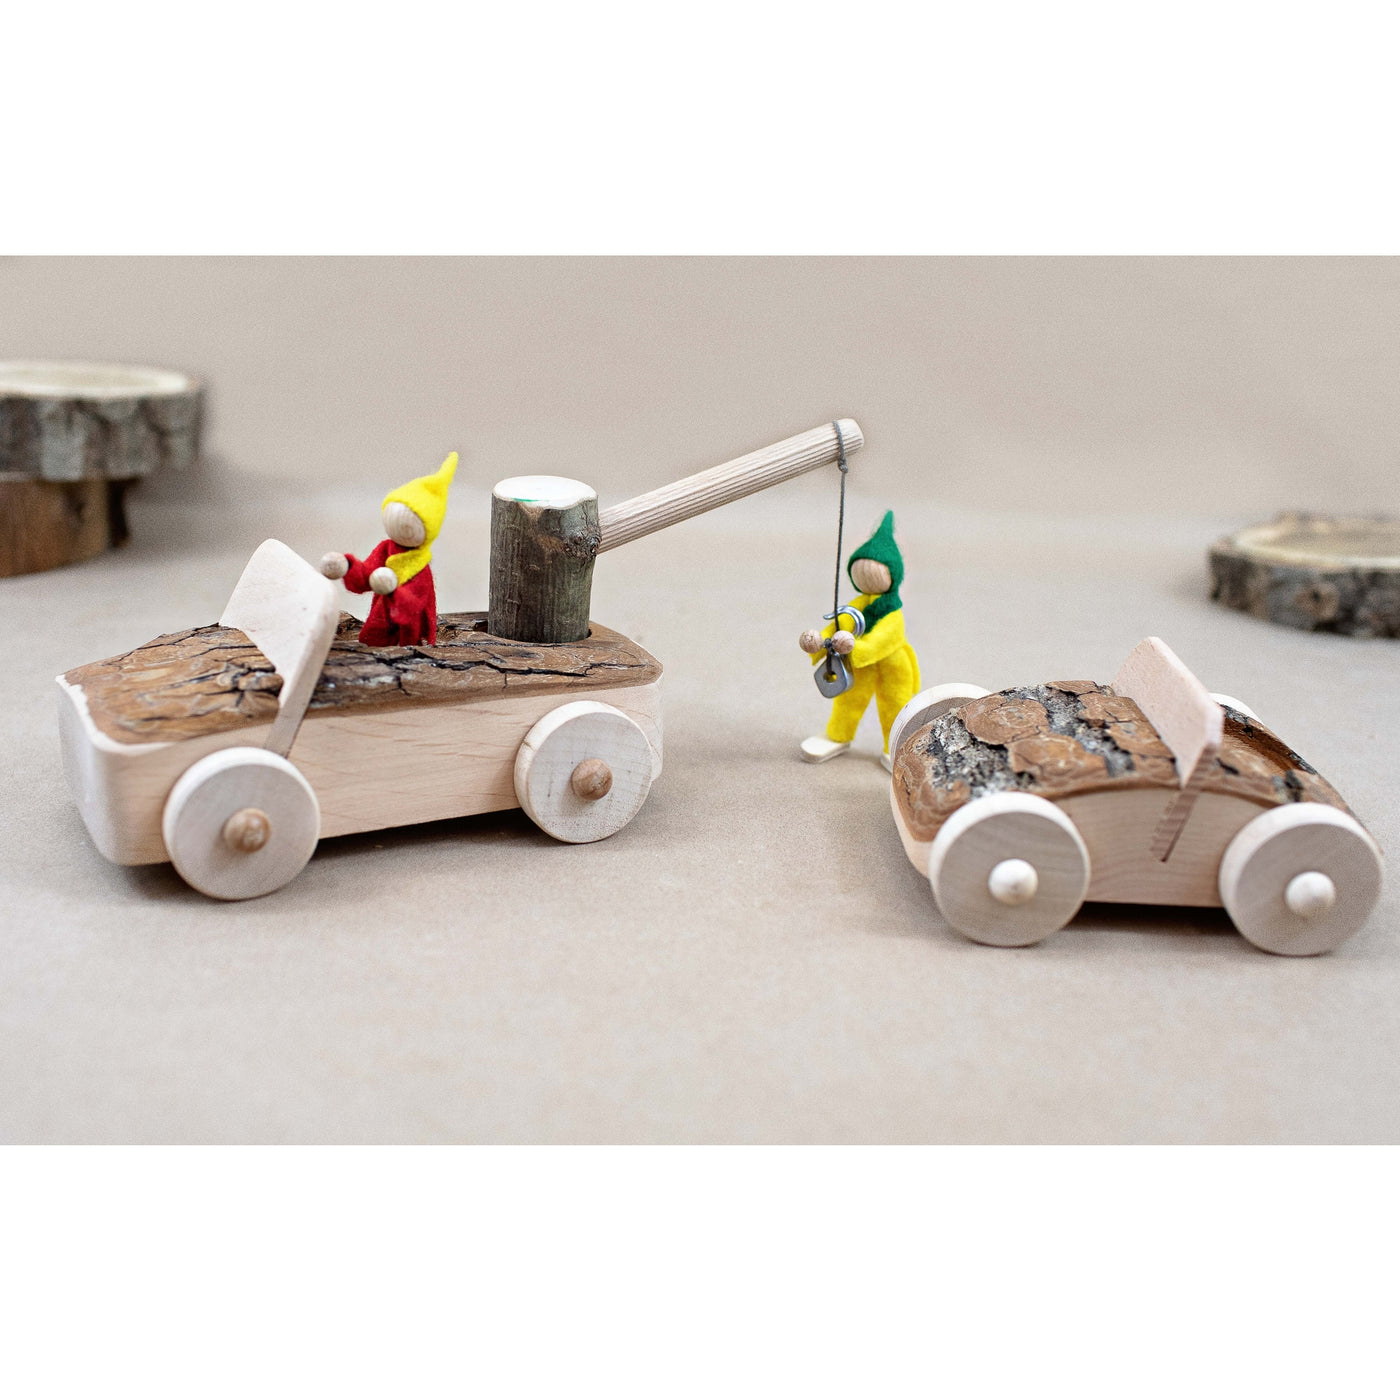 Sale Magic Wood Tow Truck With Car